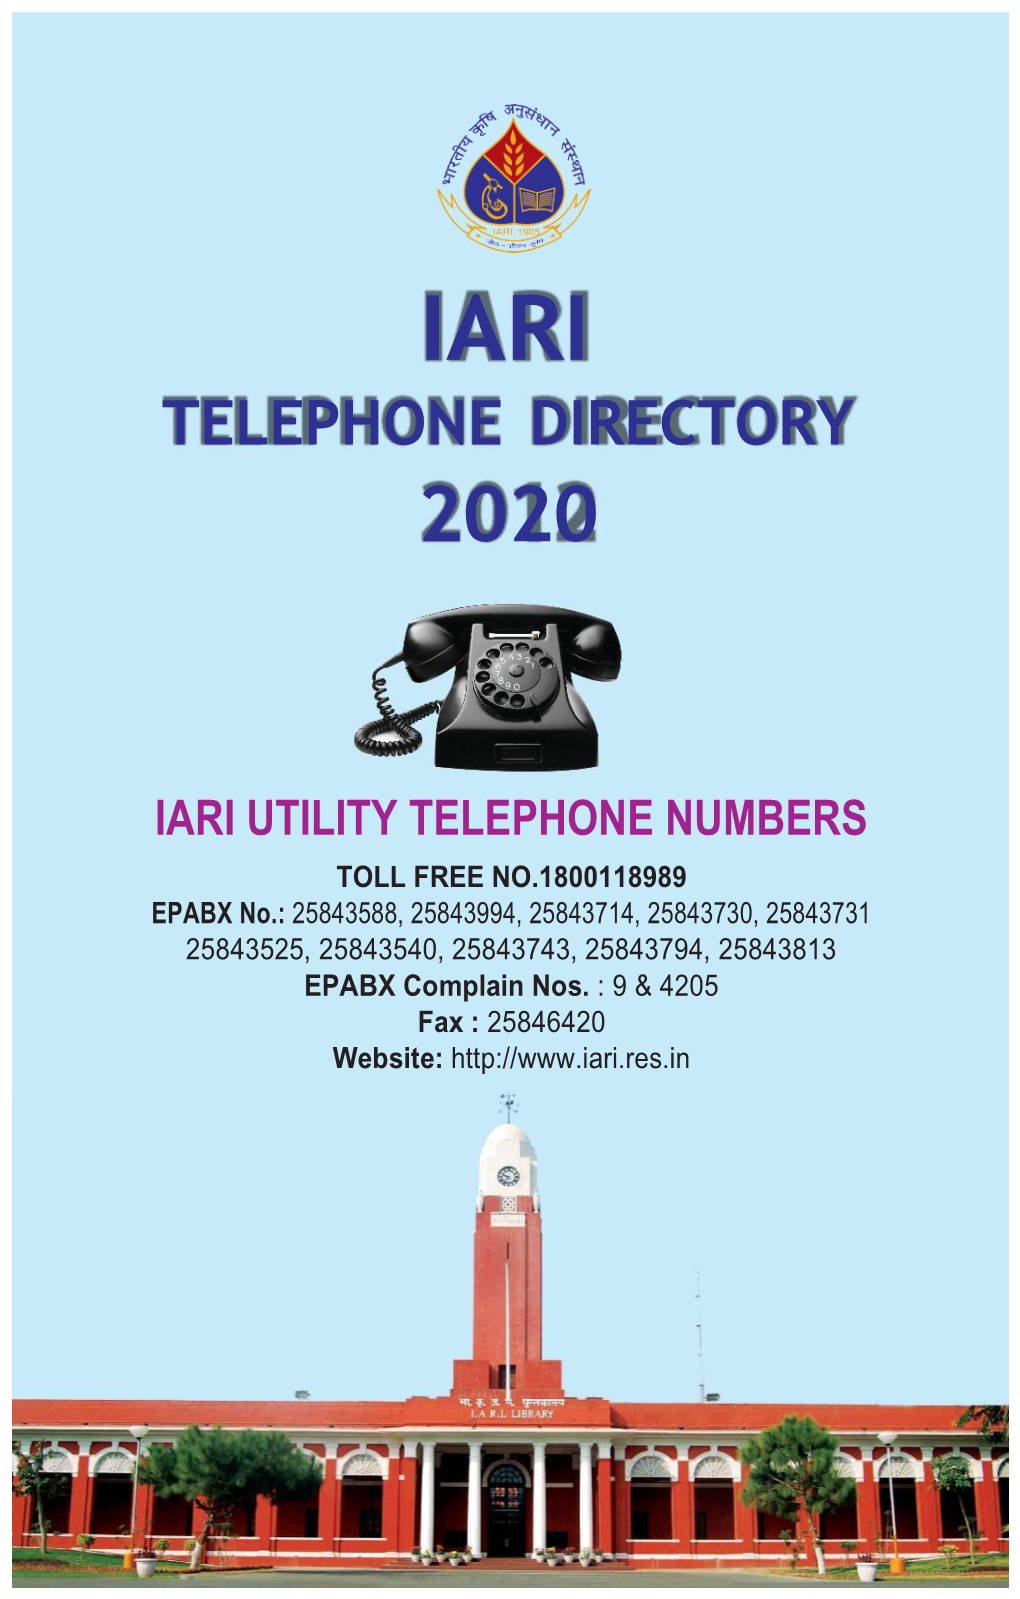 Telephone Directory of IARI As on Oct 2020